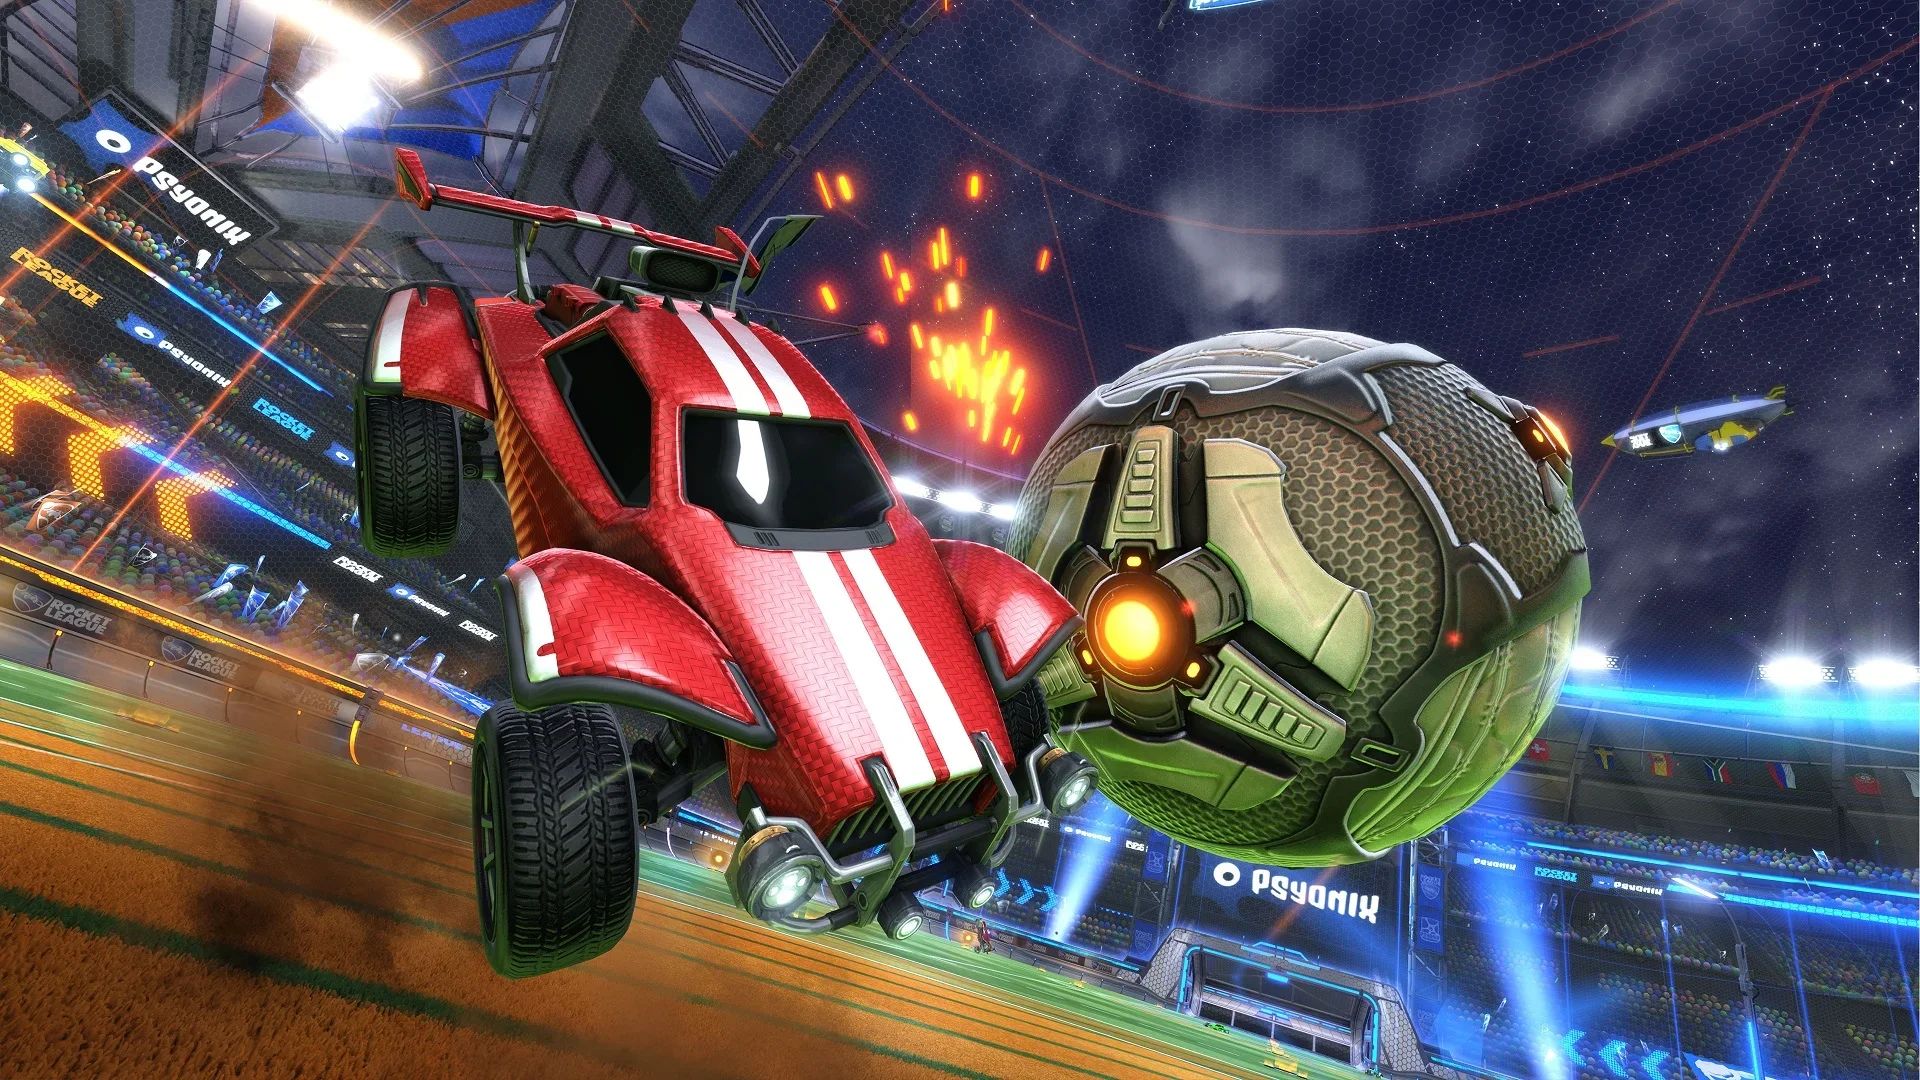 Rocket League not working: How to fix Rocket League stuck on loading screen in PS4, PS5?